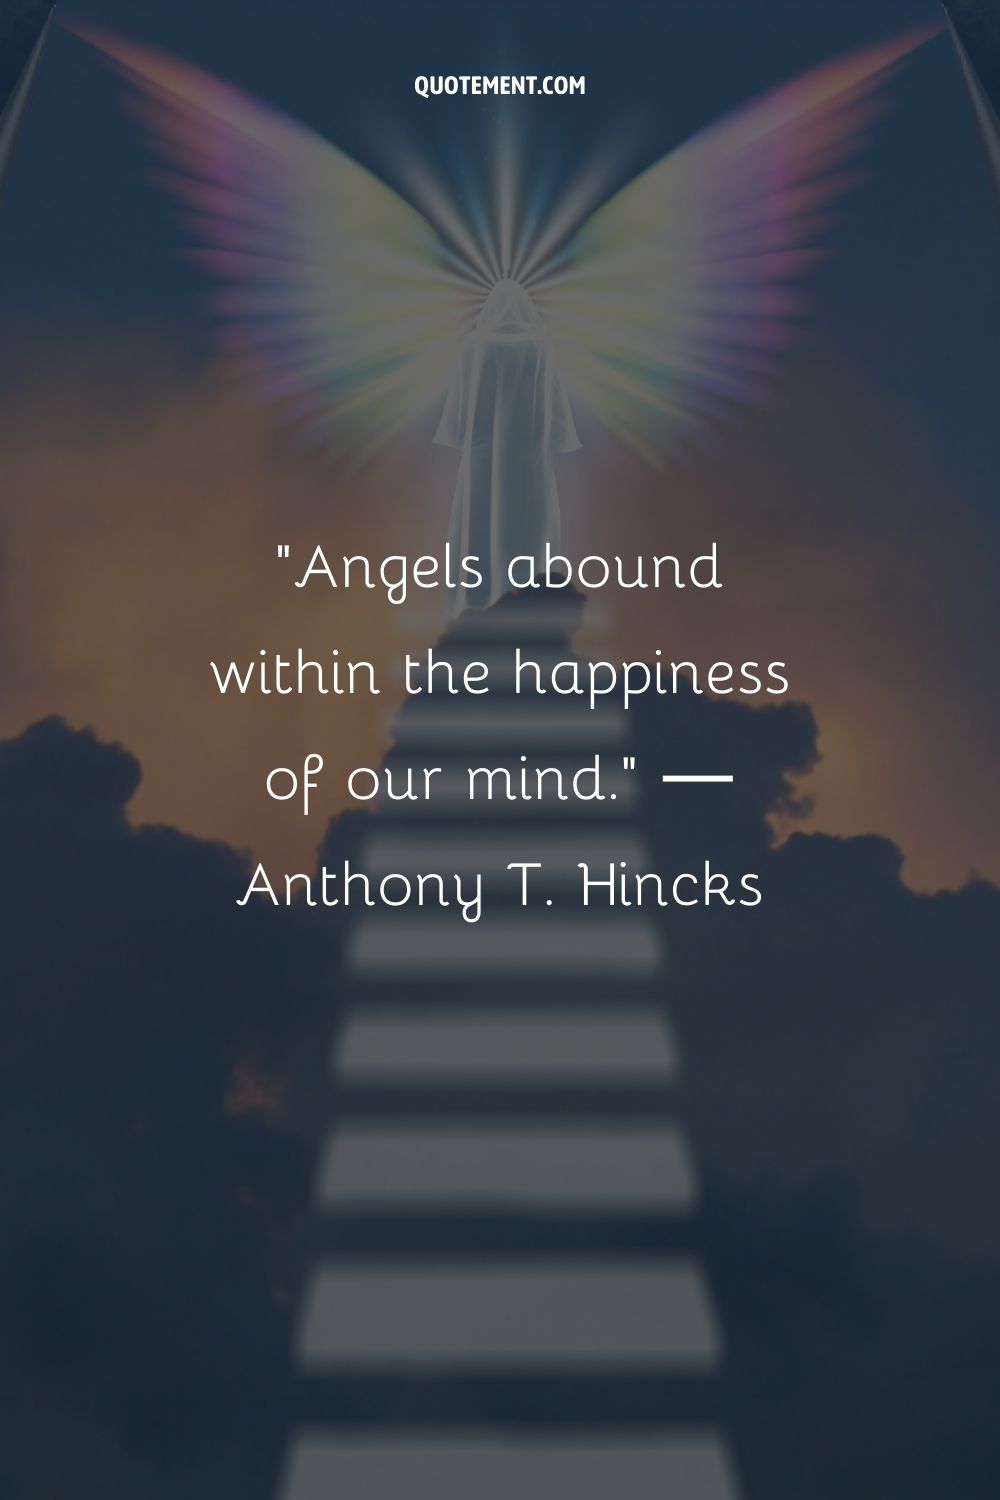 Angels abound within the happiness of our mind.